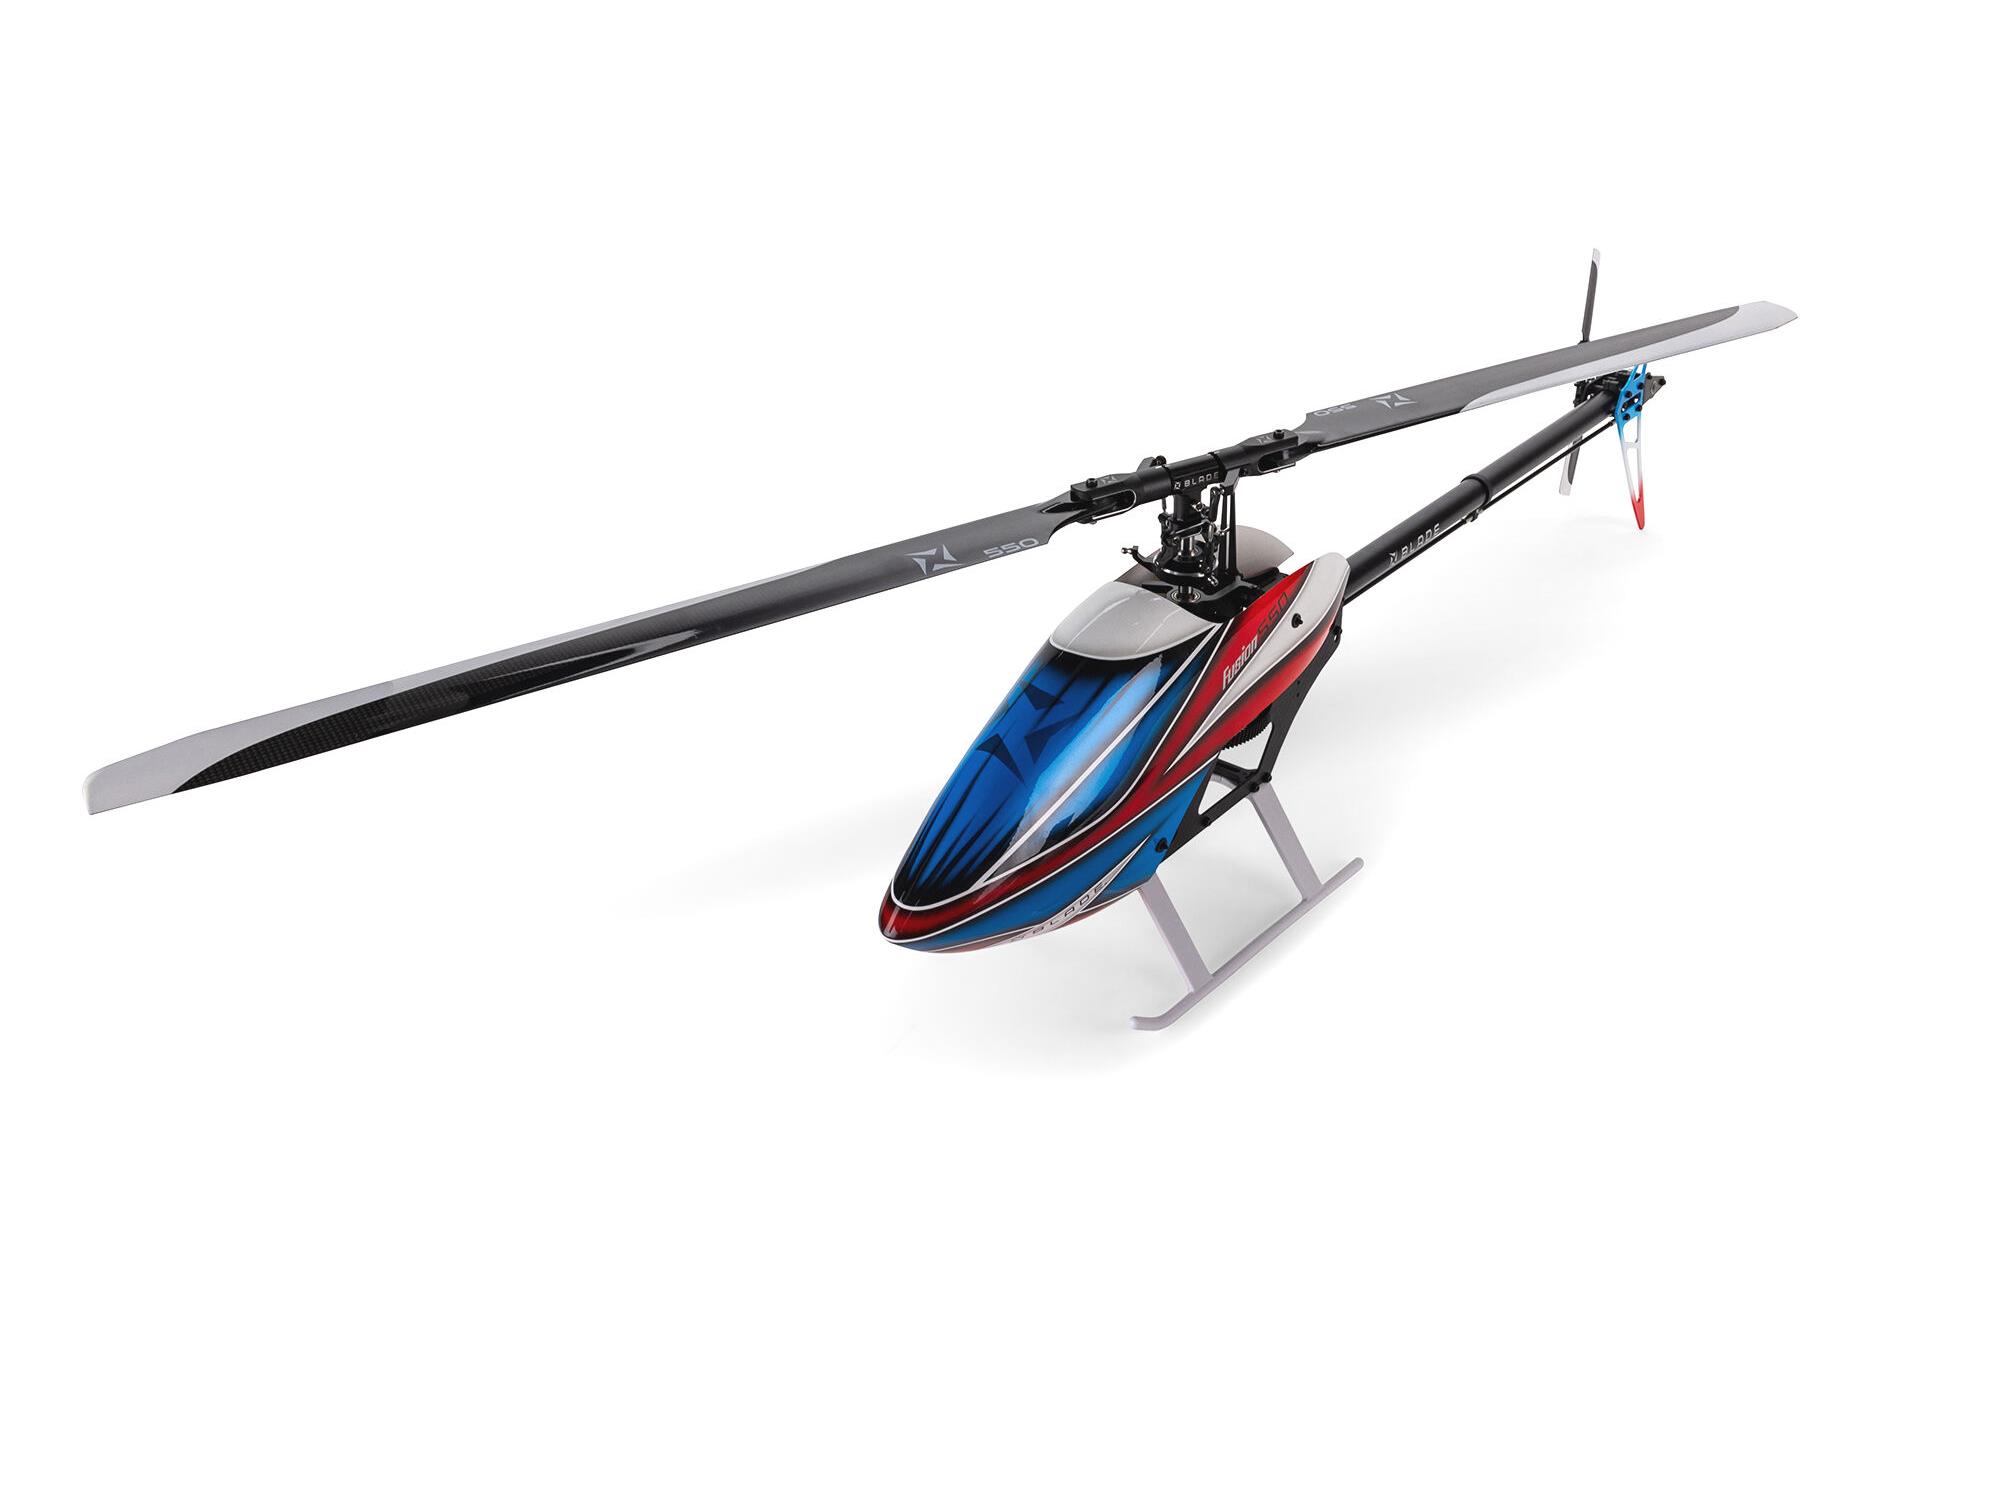 Blade RC Helicopter 120 S2 RTF (Ready-to-Fly) with Safe Technology,  BLH1100, Yellow